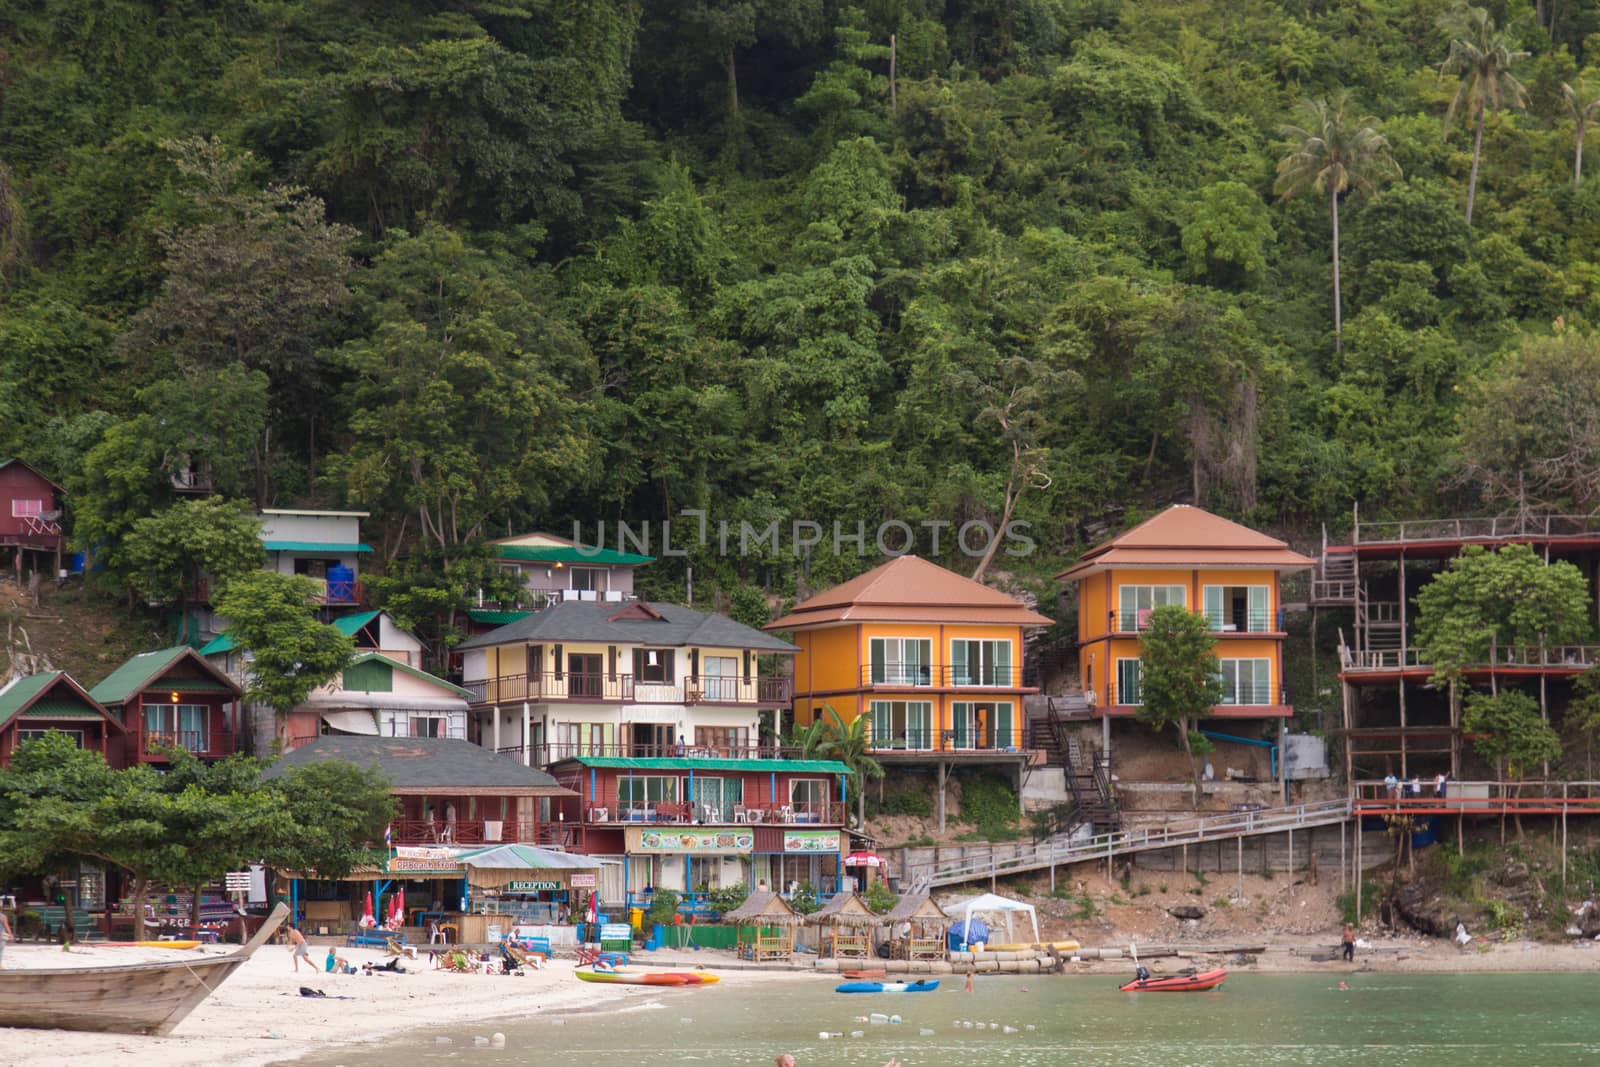 Phi Phi Thailand 12.6.2015 fishing boats in the bay with hills in the background. High quality photo